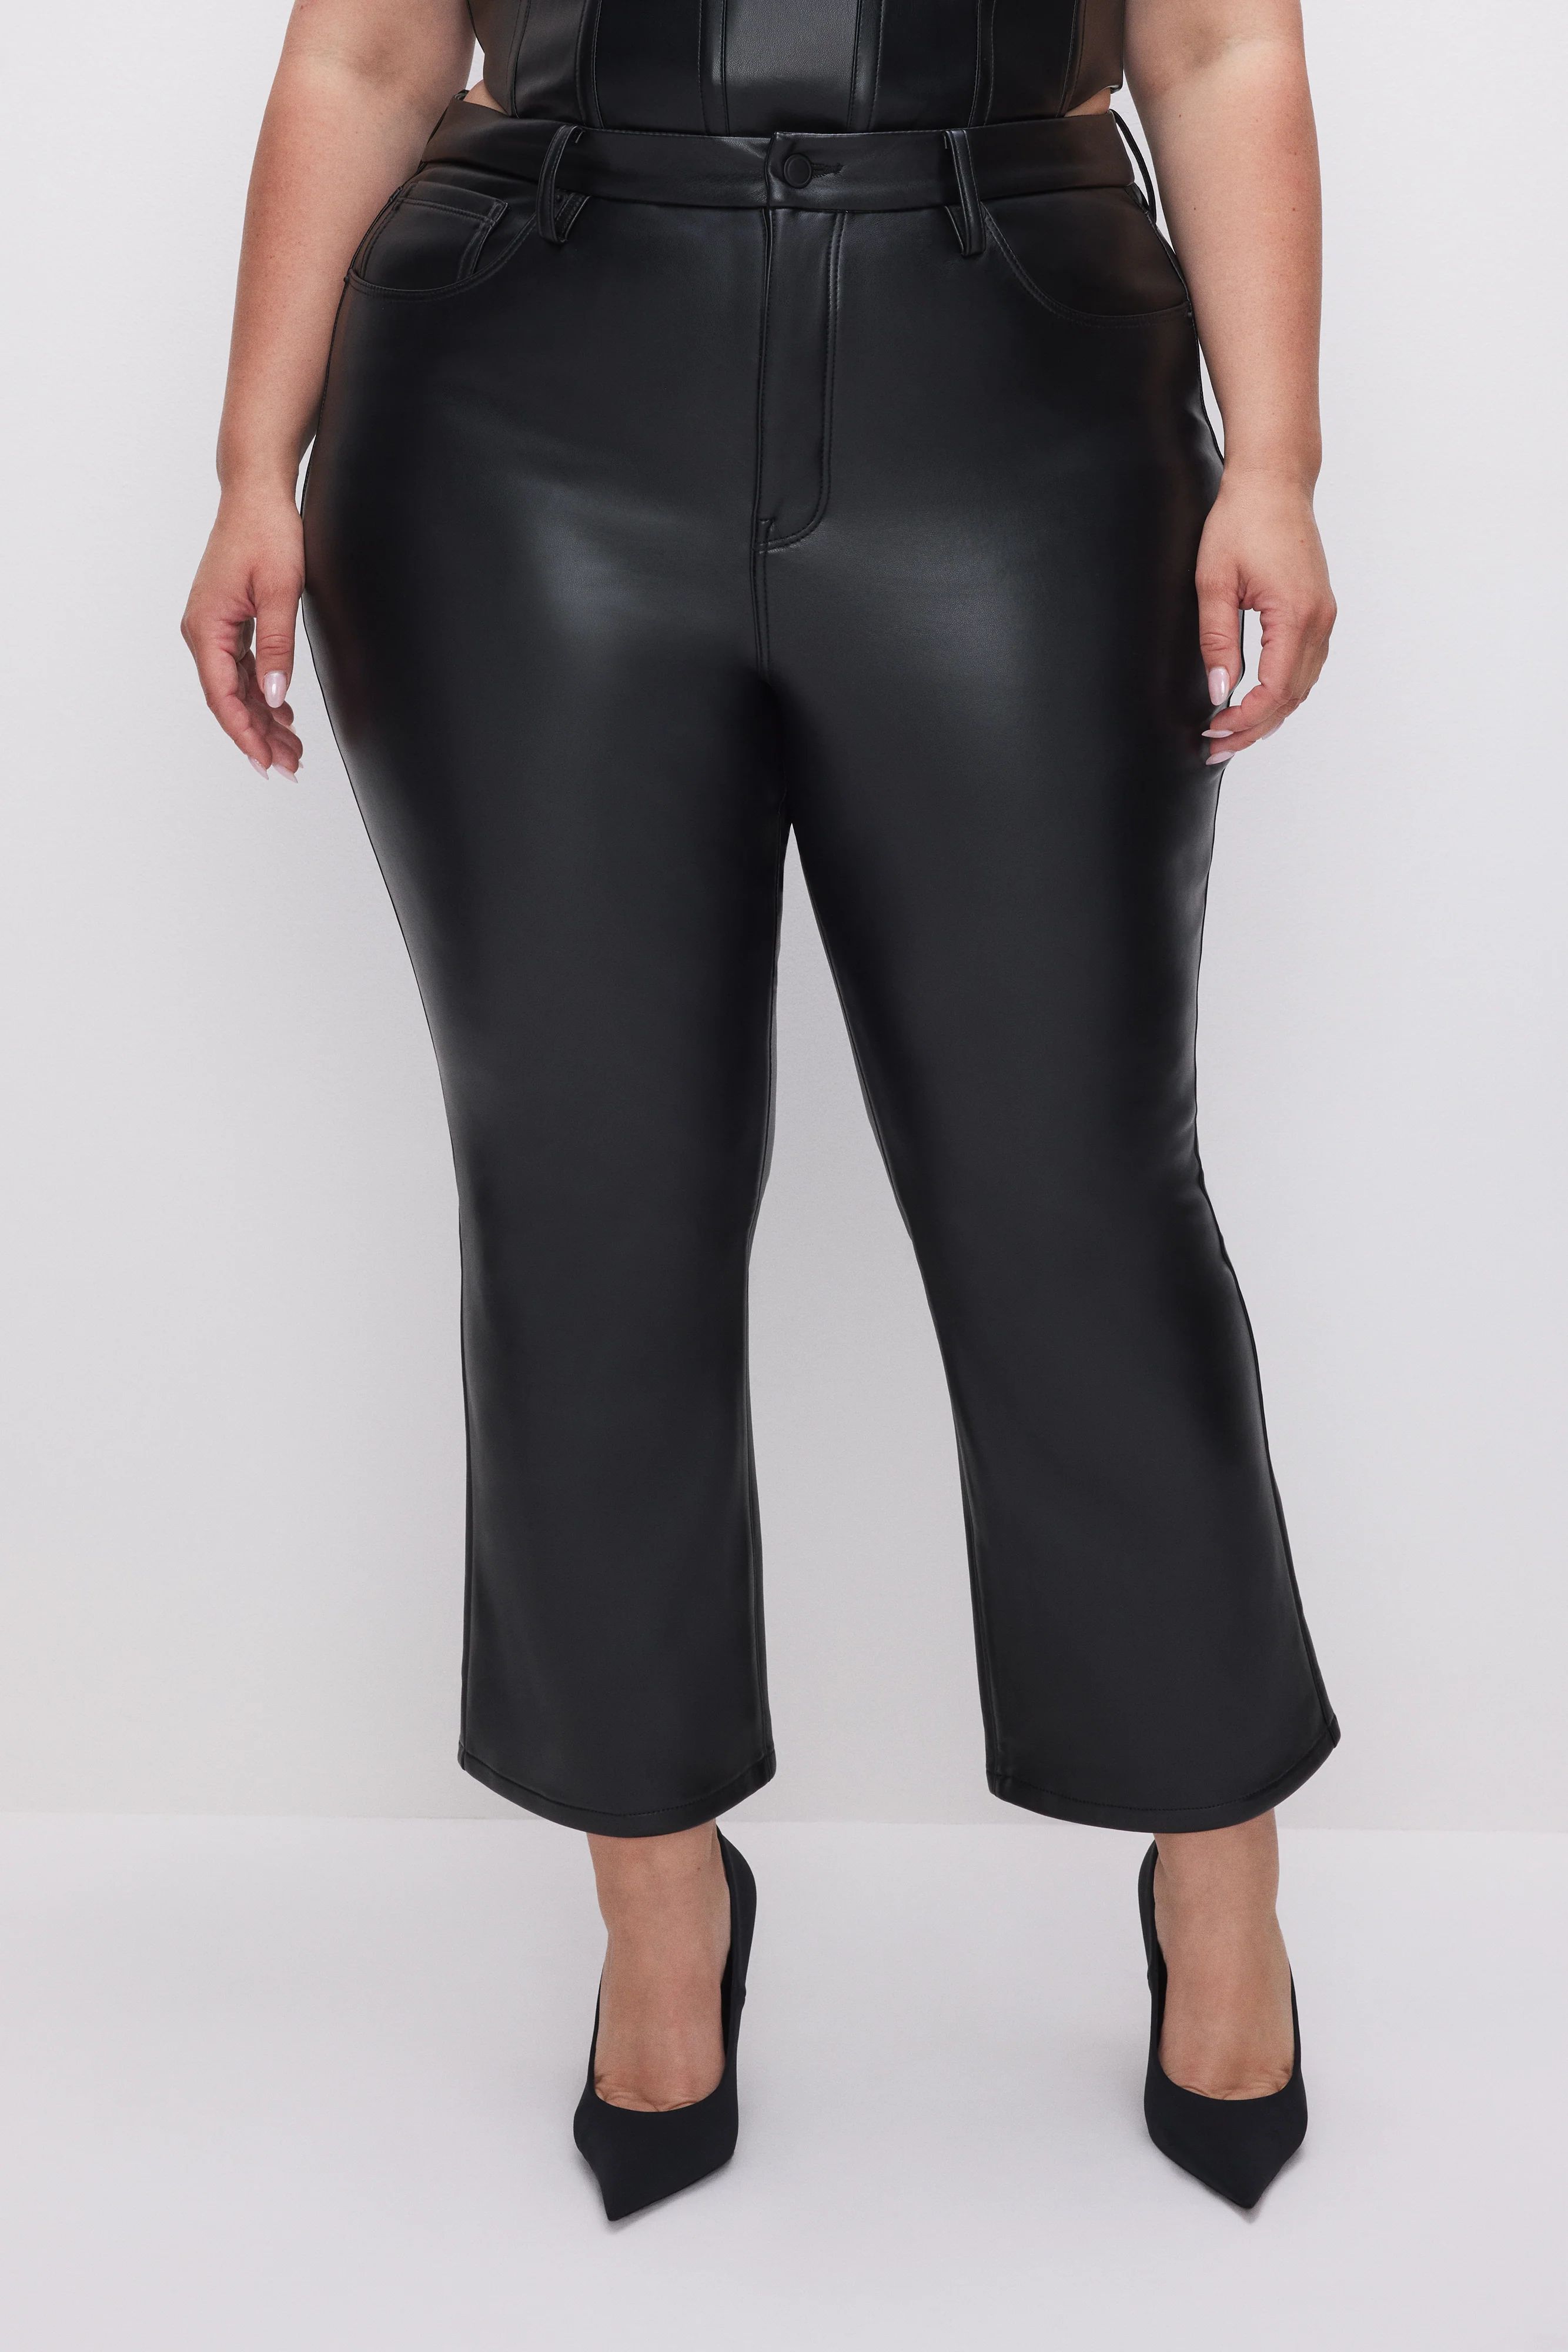 GOOD LEGS CROPPED MINI BOOT FAUX LEATHER PANTS | Good American